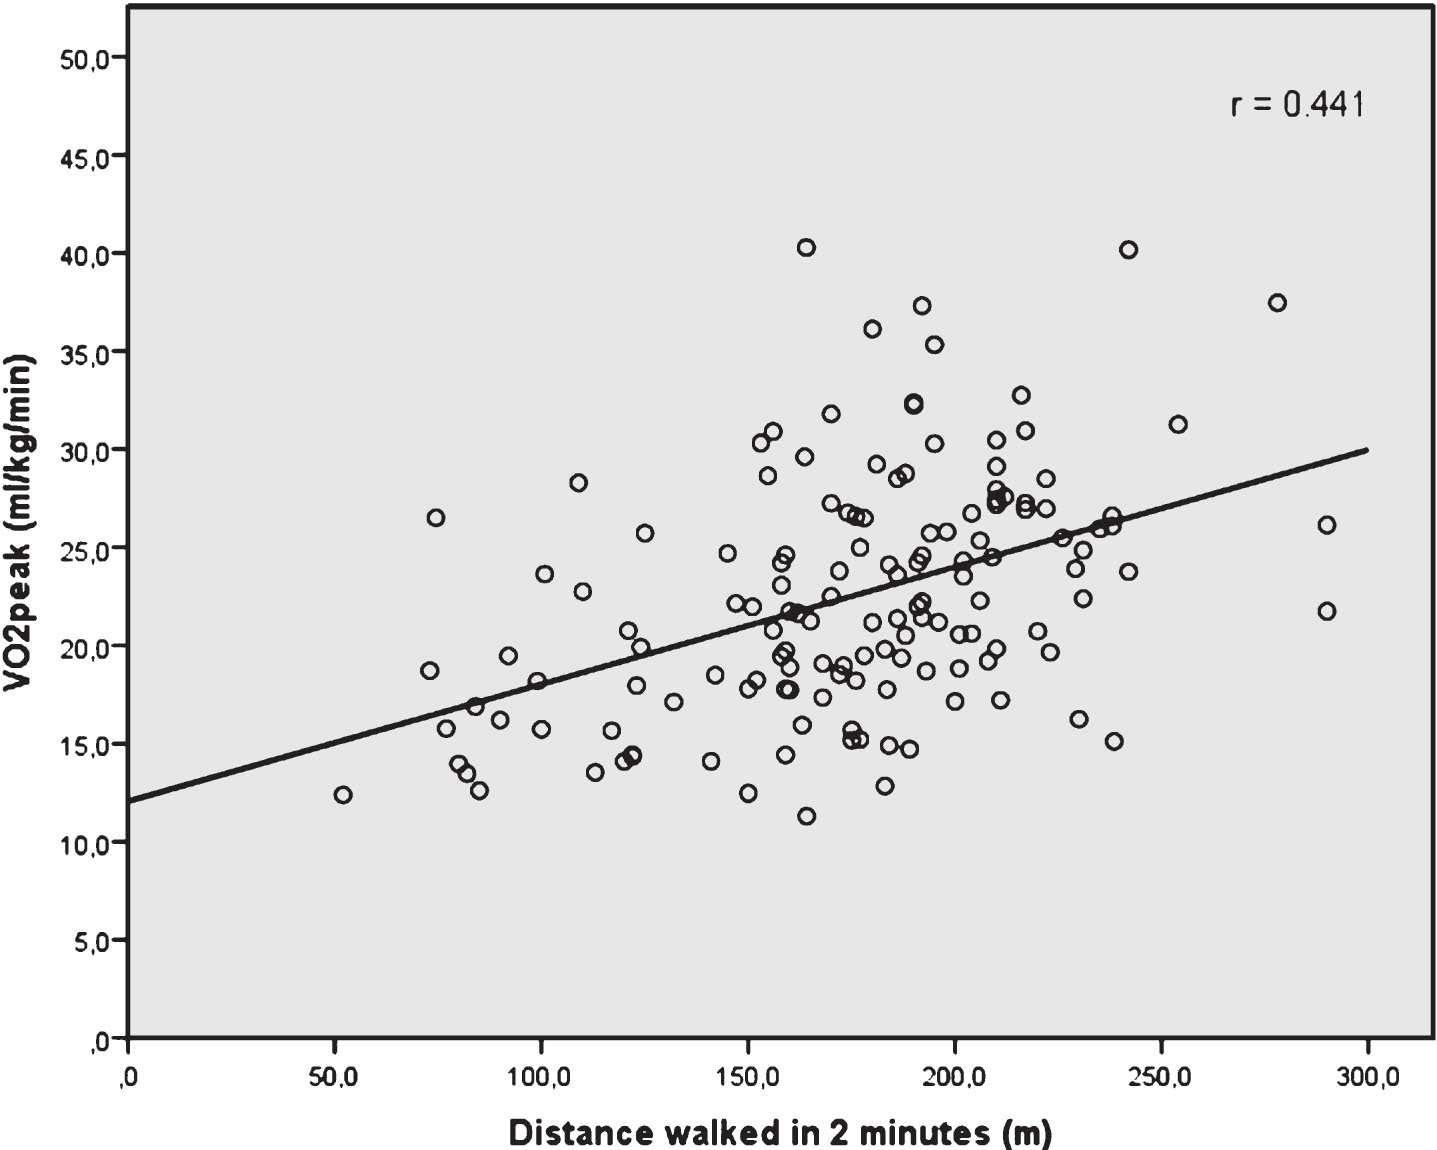 Scatterplot with correlation line between 2 min walk test distance (in meters) and the measured VO2peak (in mL/kg/min).